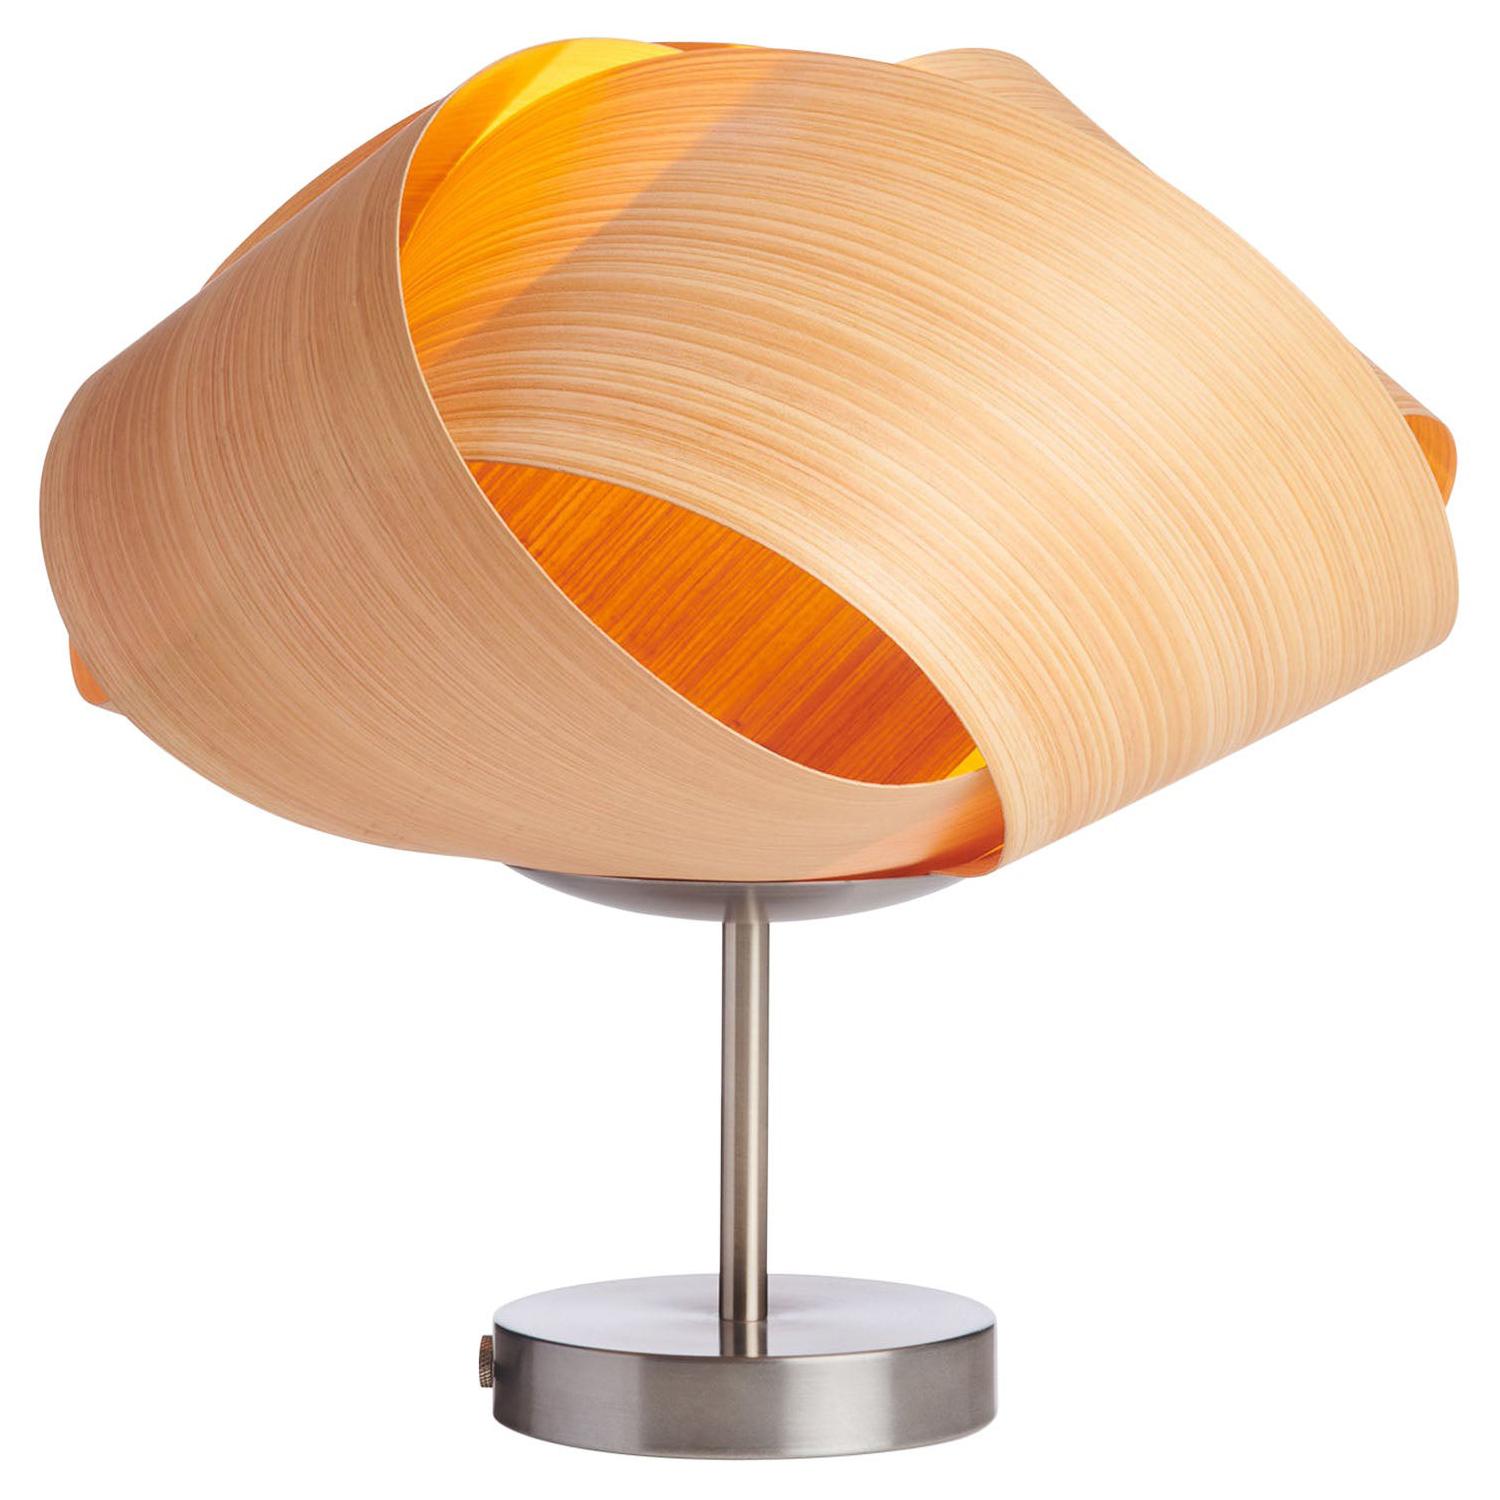 Limited-Edition Cypress Wood Accent Light with Brushed Satin Nickel Stand